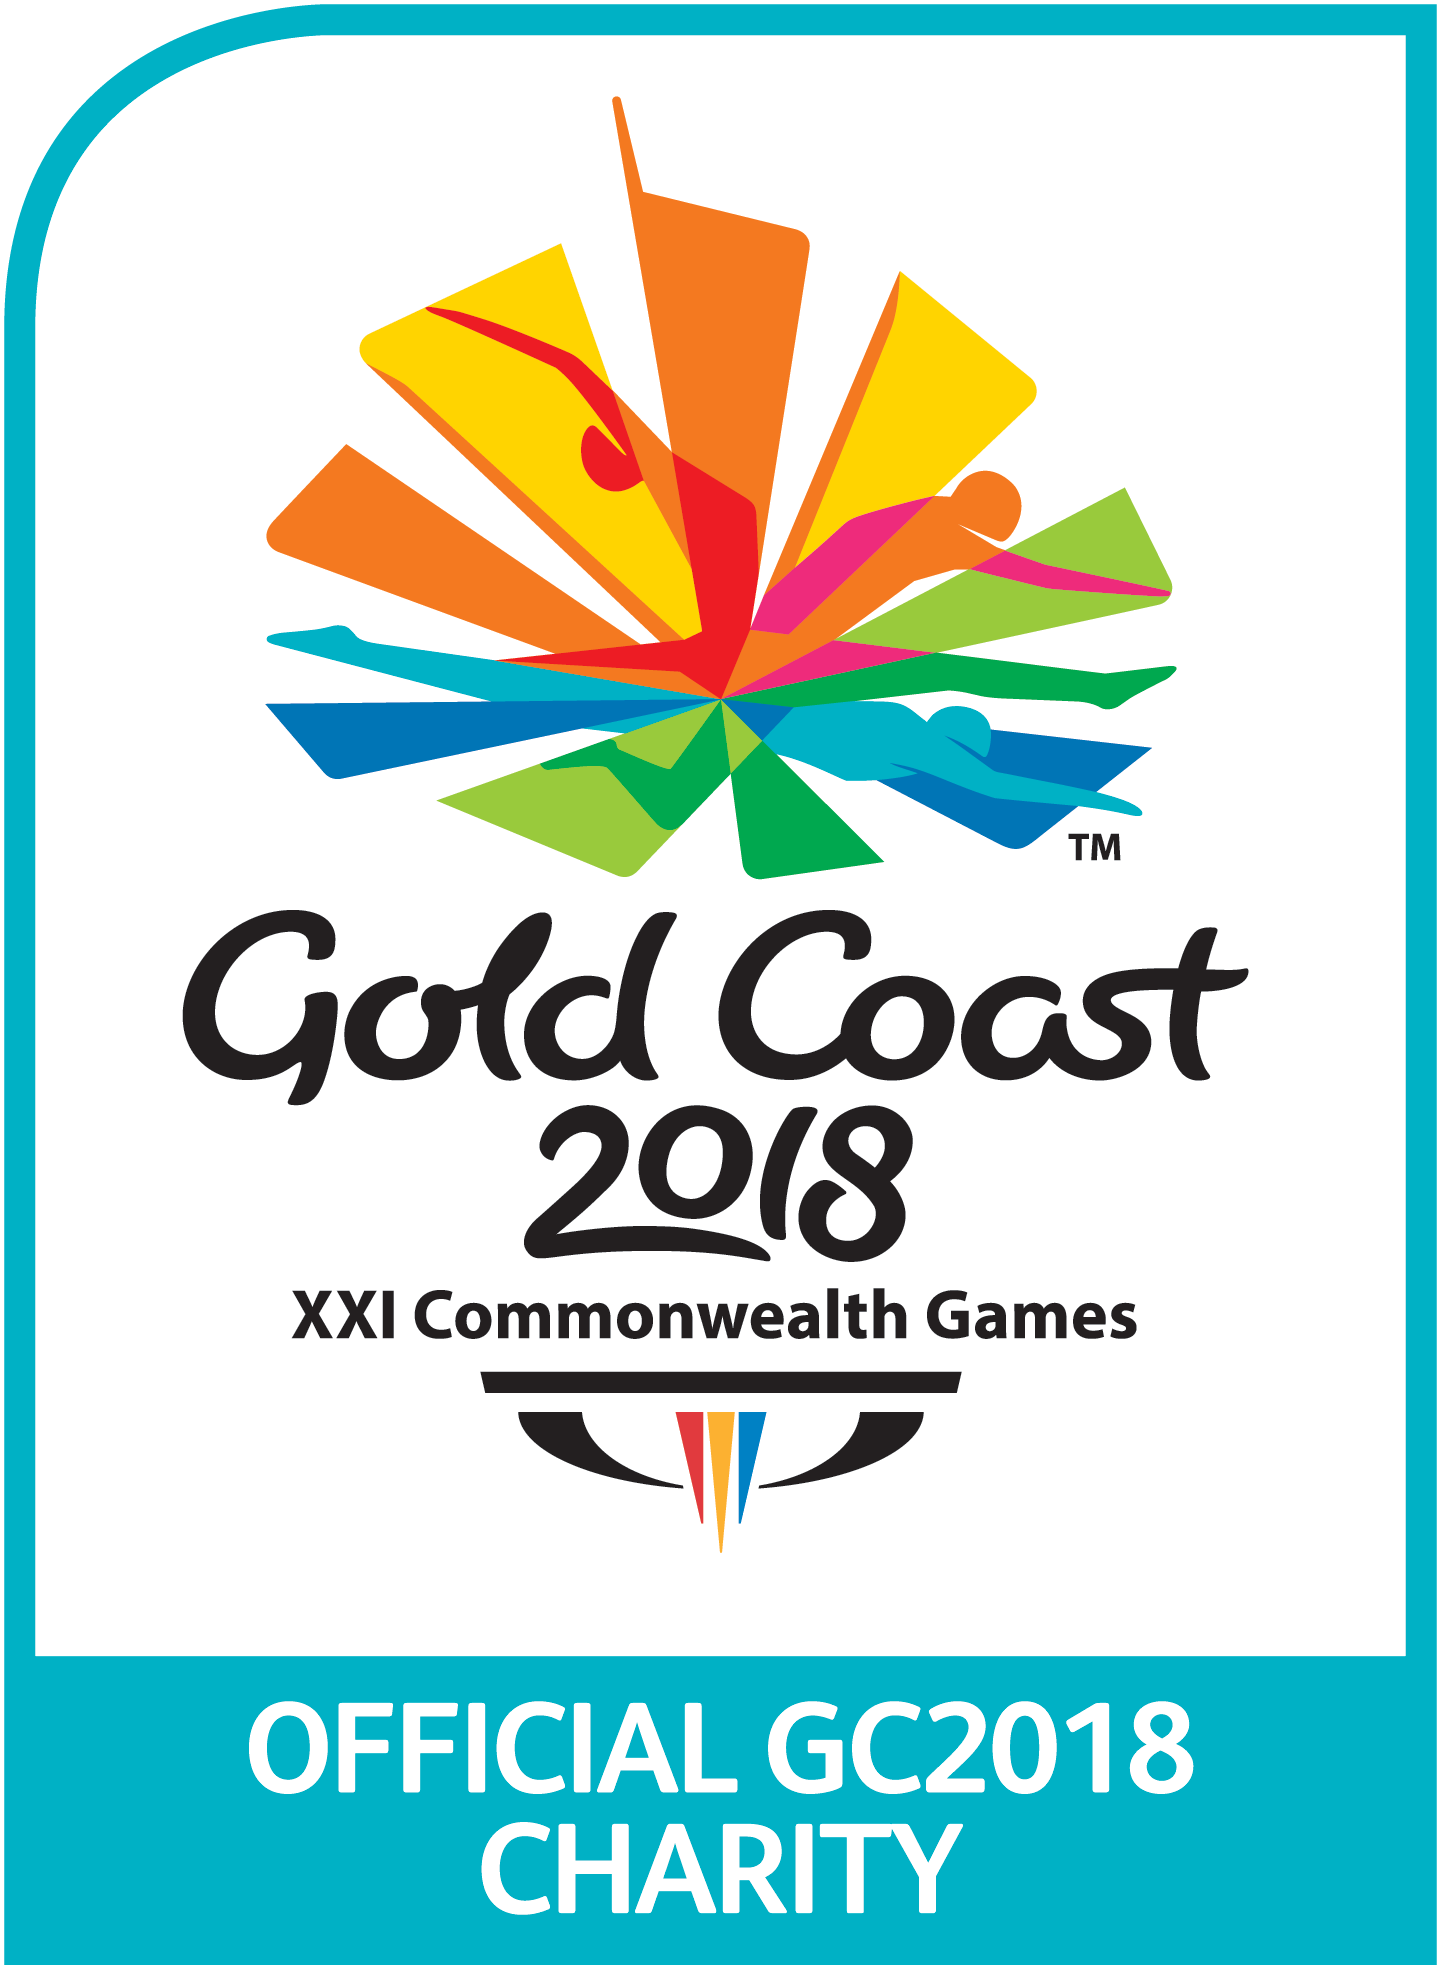 Gold Coast Community Fund named official charity of 2018 Commonwealth Games